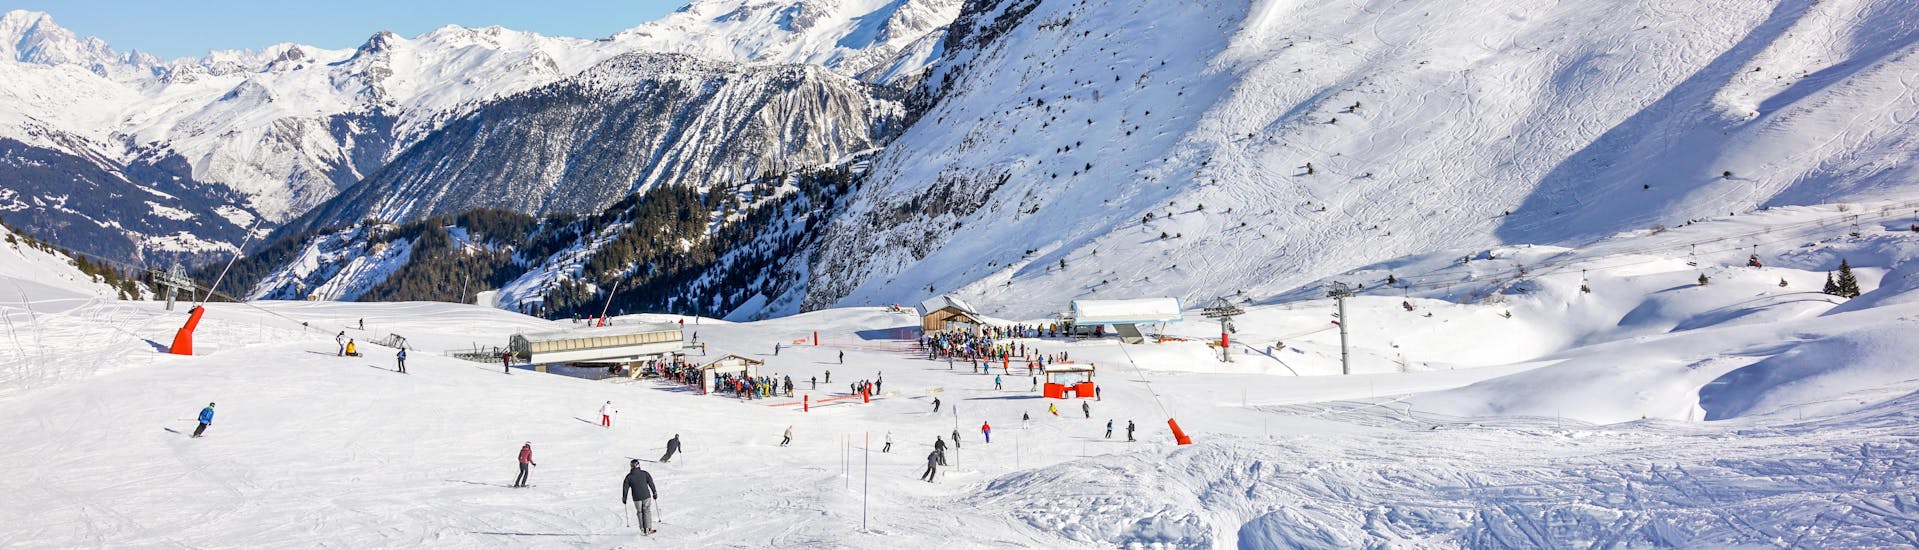 People enjoy skiing during a sunny day in Courchevel 1850 ski resort.